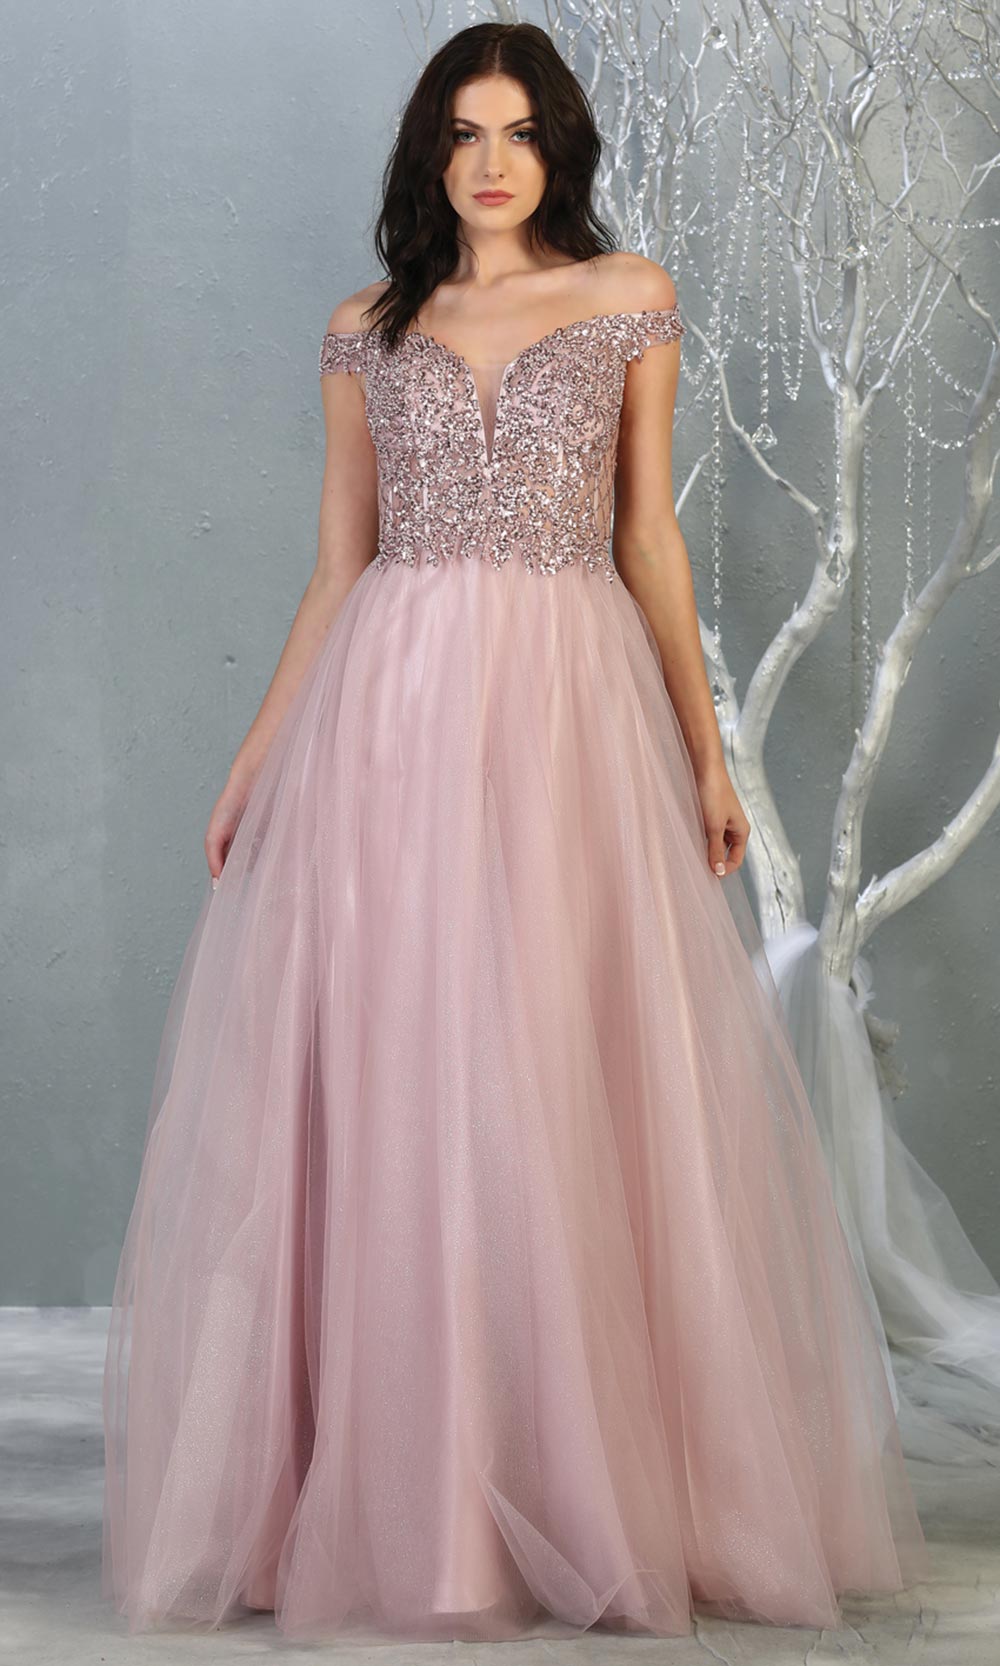 Mayqueen RQ7864 long mauve off shoulder sequin top evening gown. Full length flowy dress w/ tulle skirt is perfect for  enagagement/e-shoot dress, sweet 16, debut, formal evening party dress, prom, engagement, wedding reception. Plus sizes avail.jpg